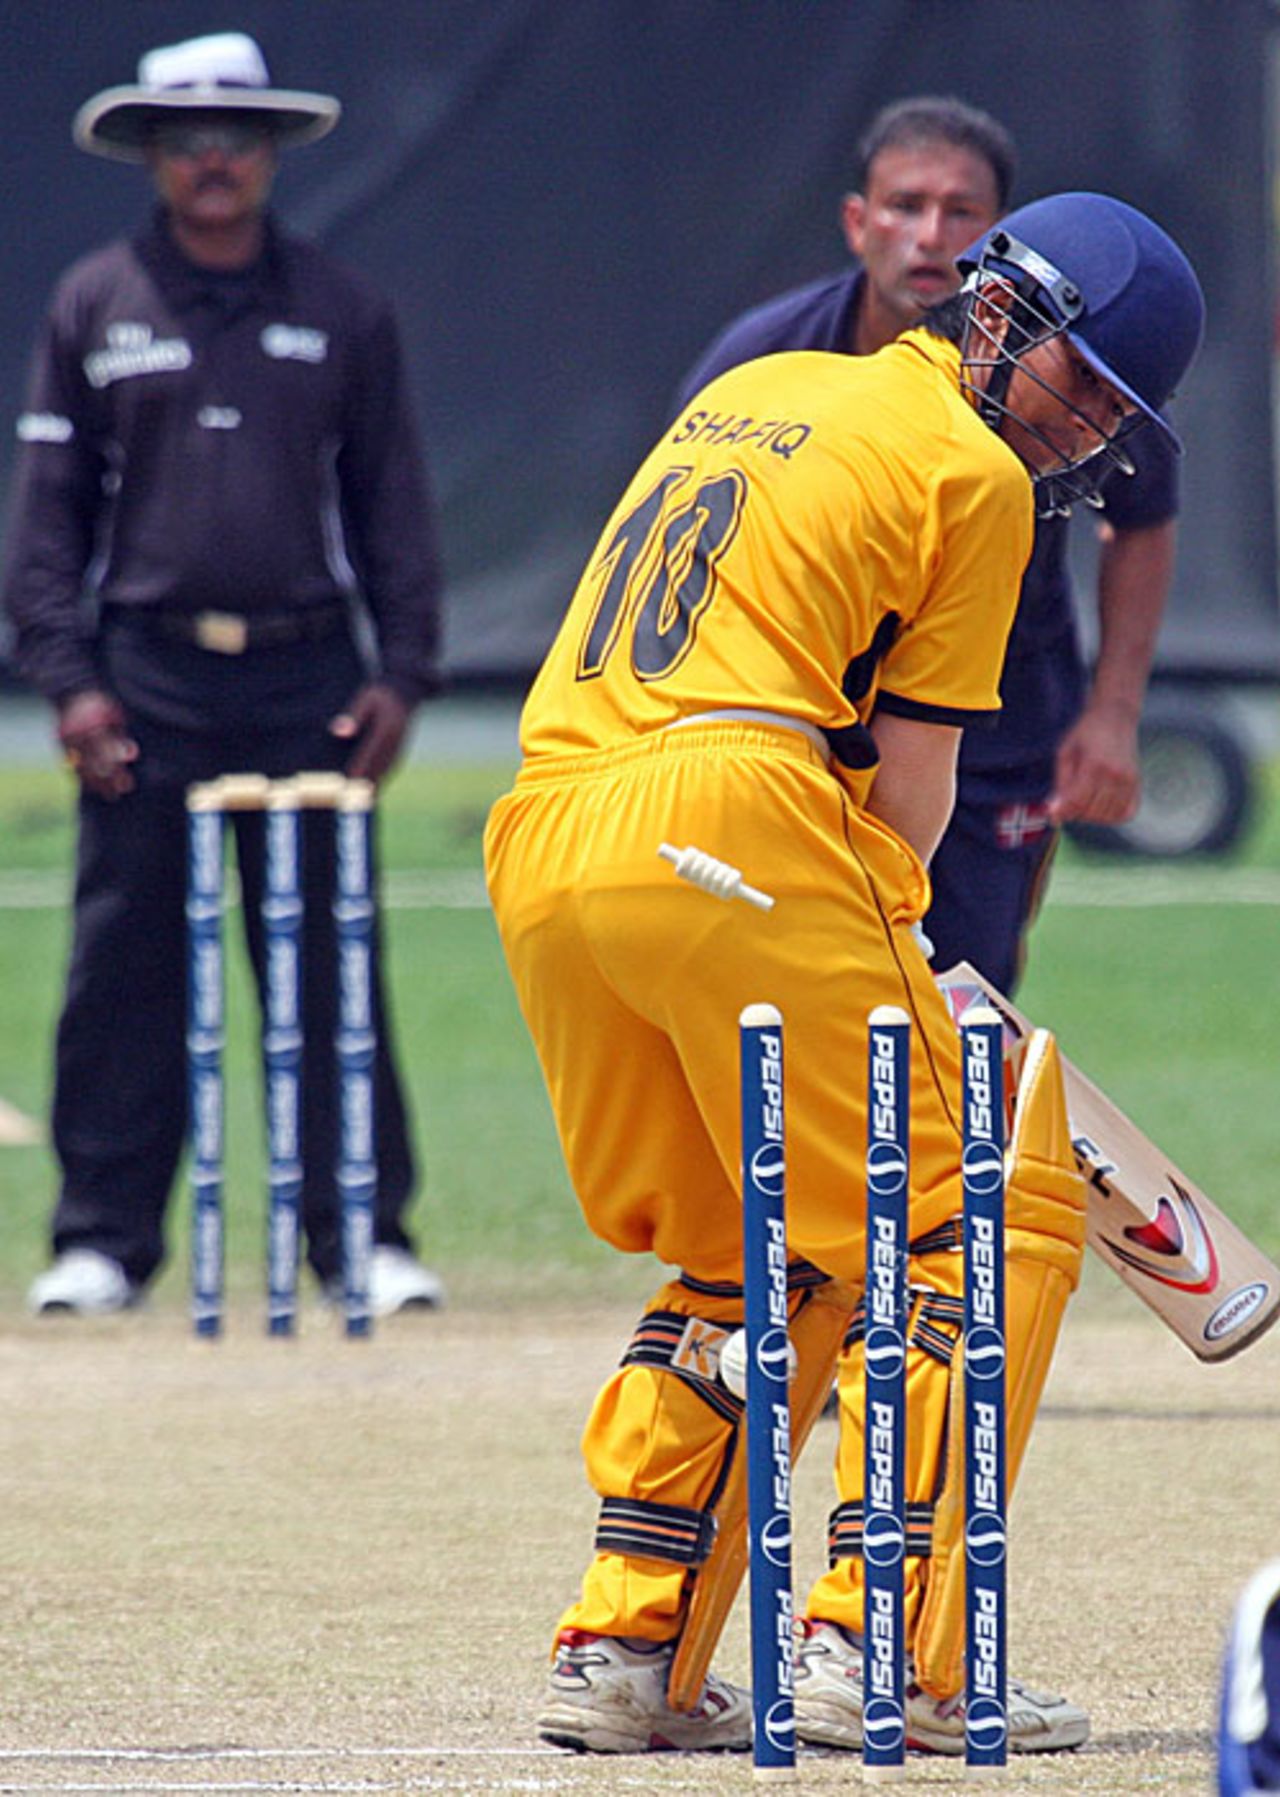 Shafiq Sharif is bowled by Aamer Waheed for 8, Malaysia v Norway, ICC World Cricket League Division 6, Singapore, August 31, 2009 